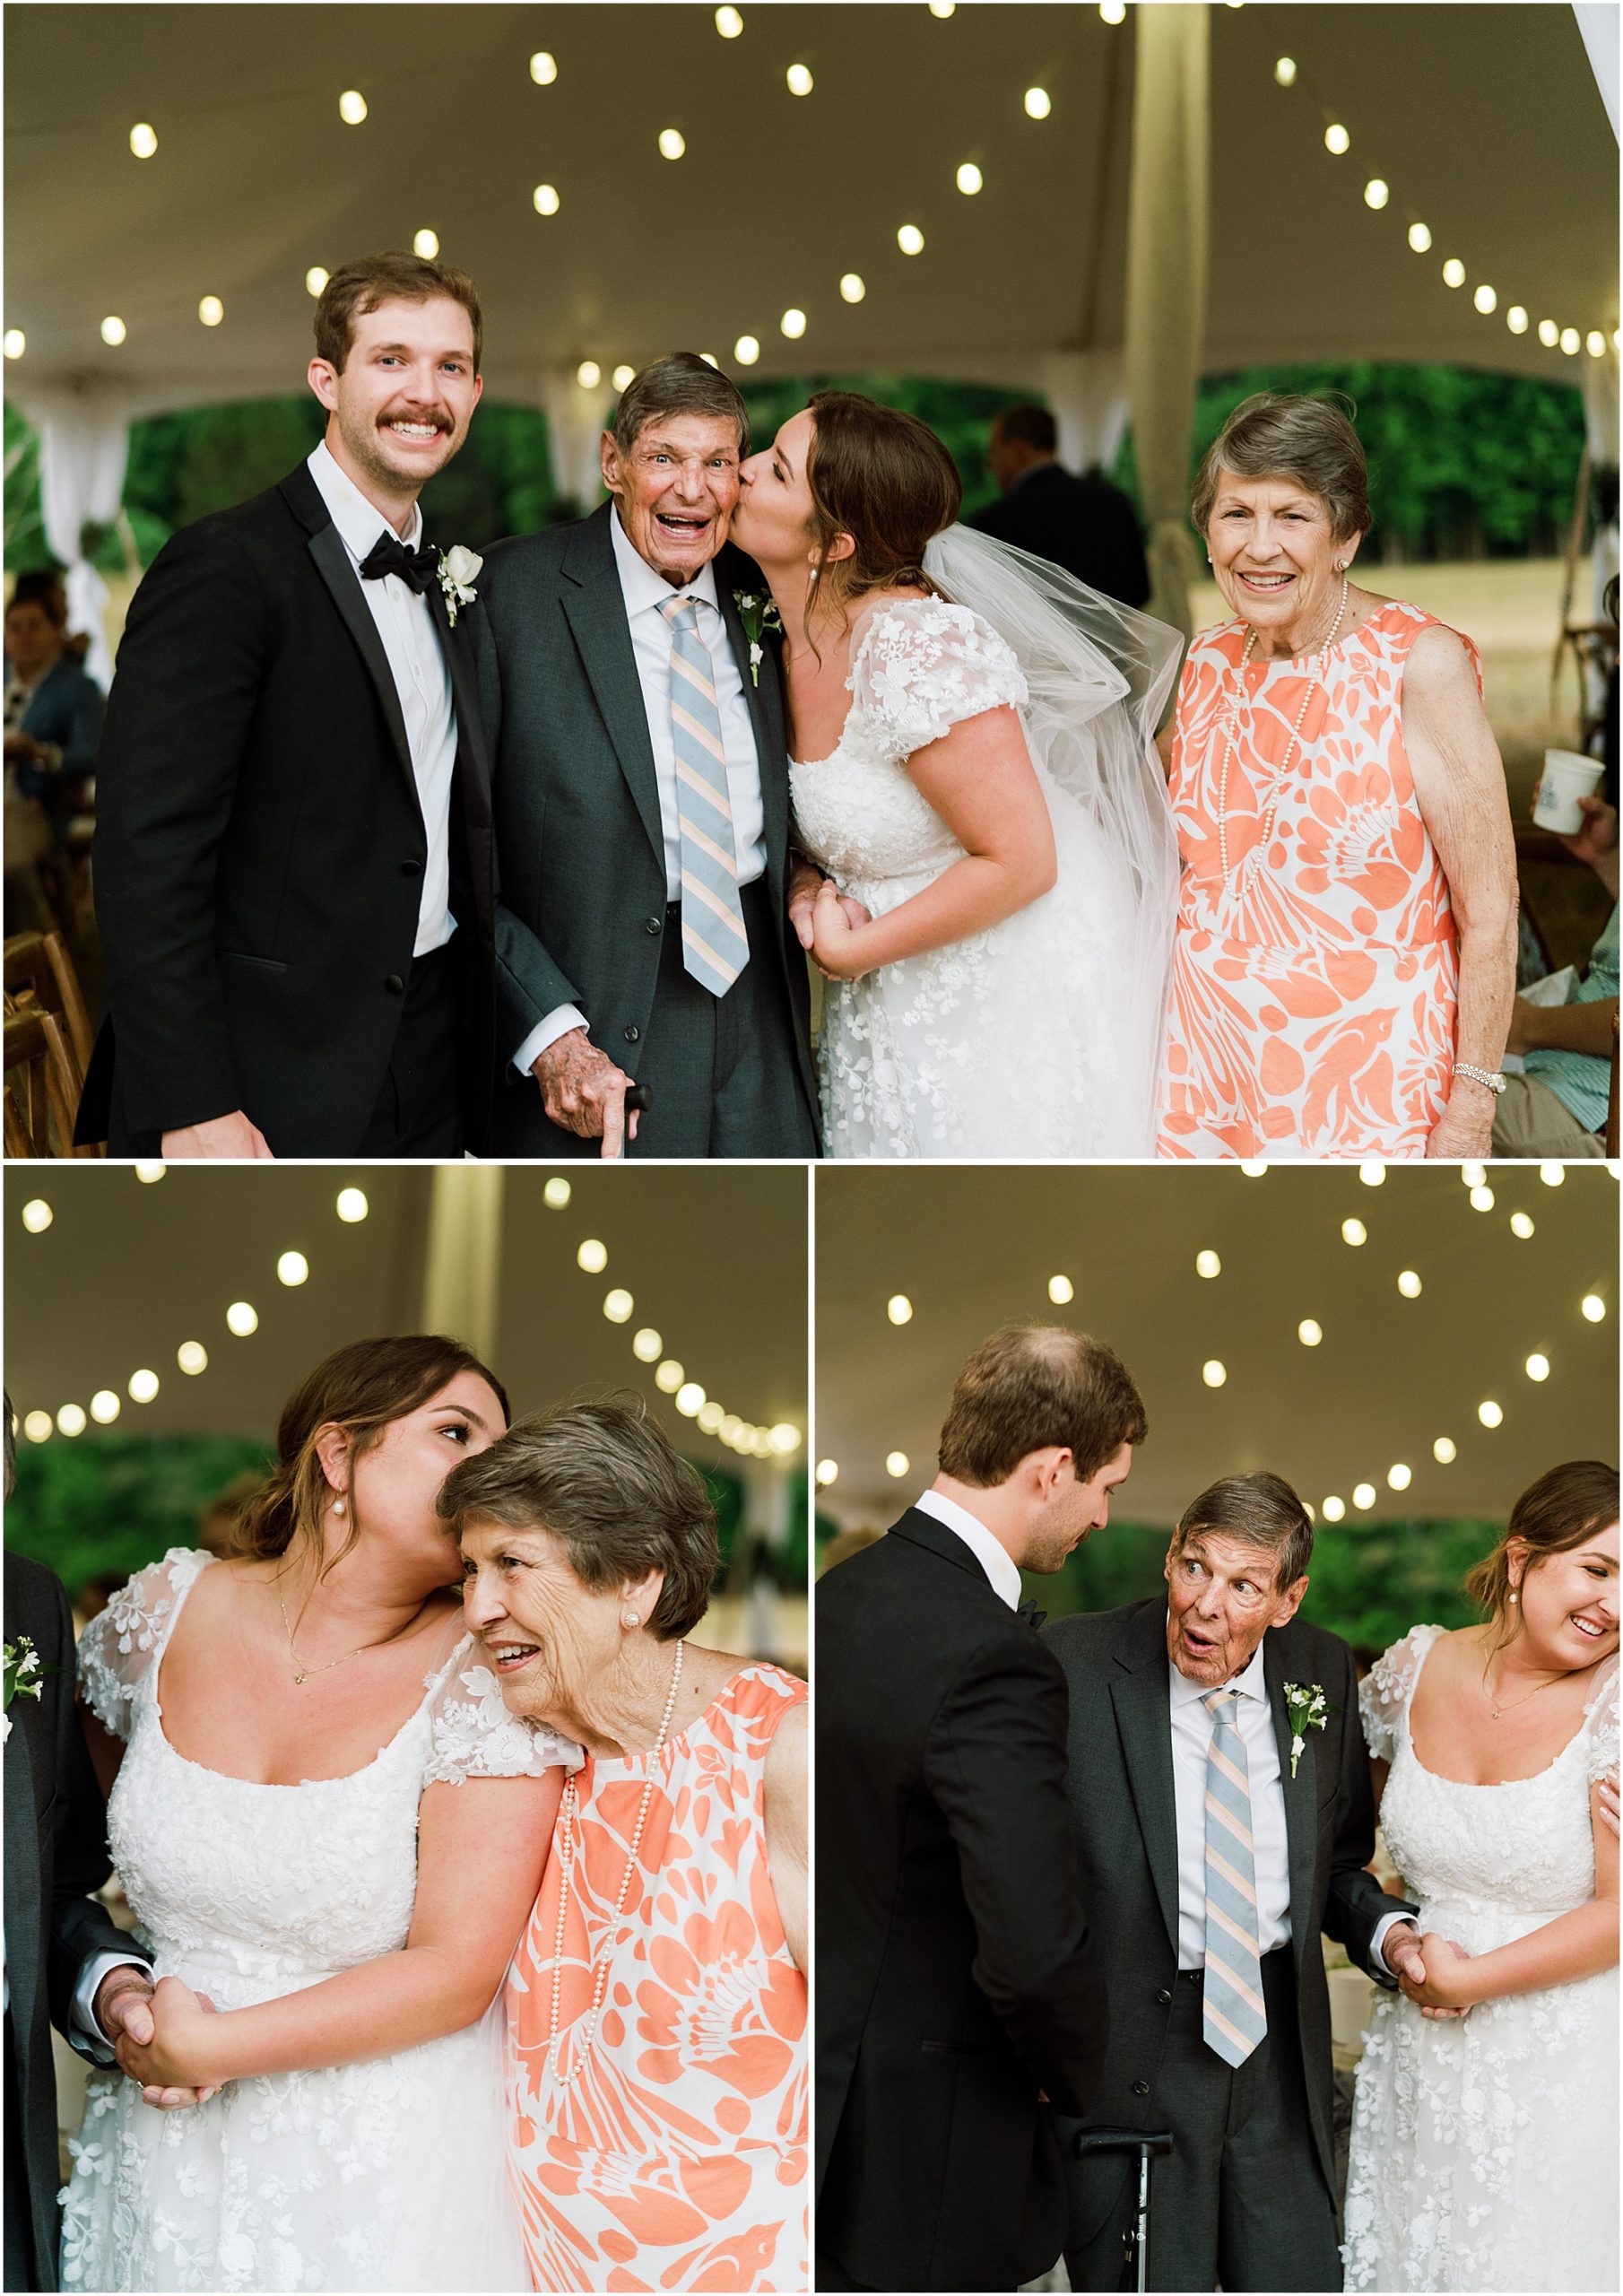 Bride and groom with brides grandparents. Candid family moments with brides family.